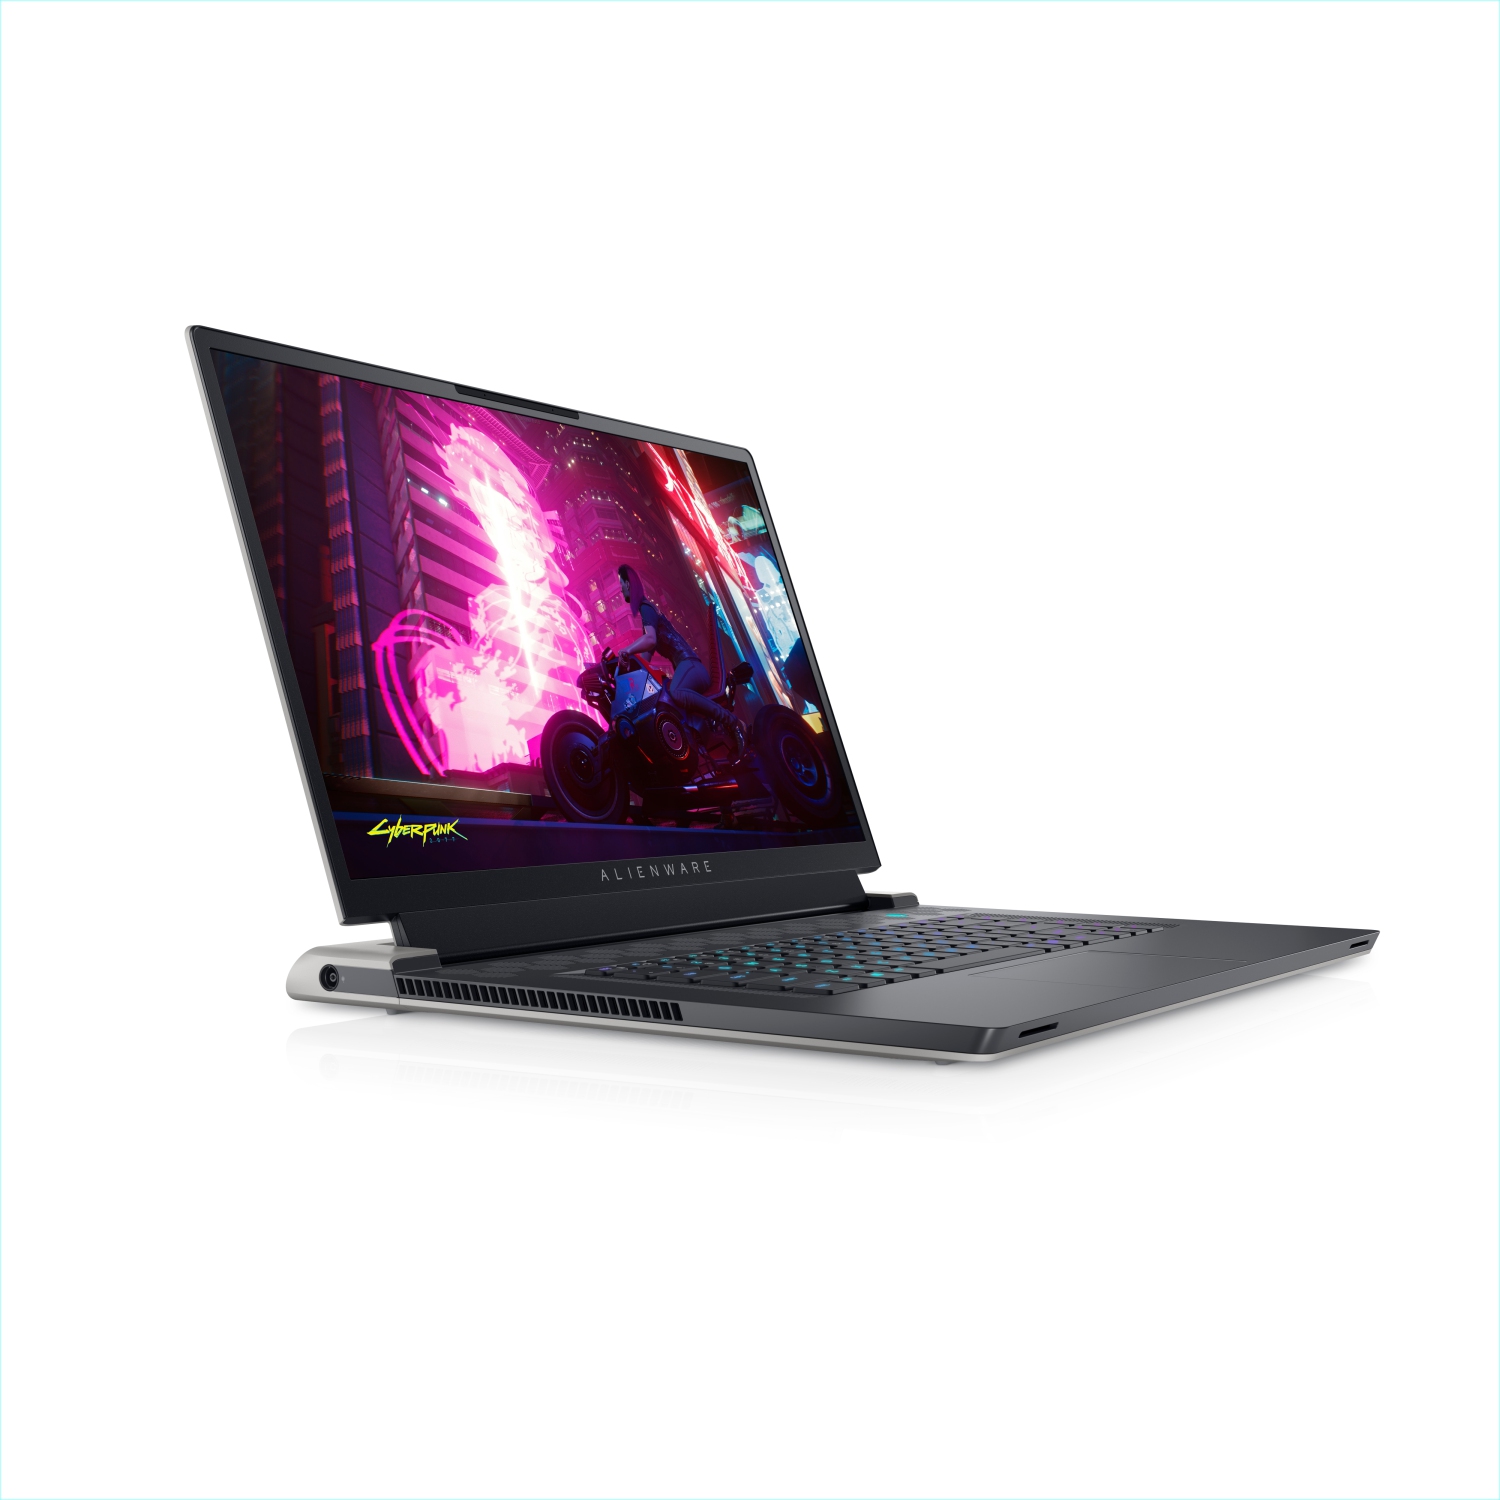 Refurbished (Excellent) – Dell Alienware X17 R1 Gaming Laptop (2021) | 17.3" FHD | Core i7 - 1TB SSD + 1TB SSD - 32GB RAM - RTX 3070 | 8 Cores @ 4.6 GHz - 11th Gen CPU - 8GB GDDR6